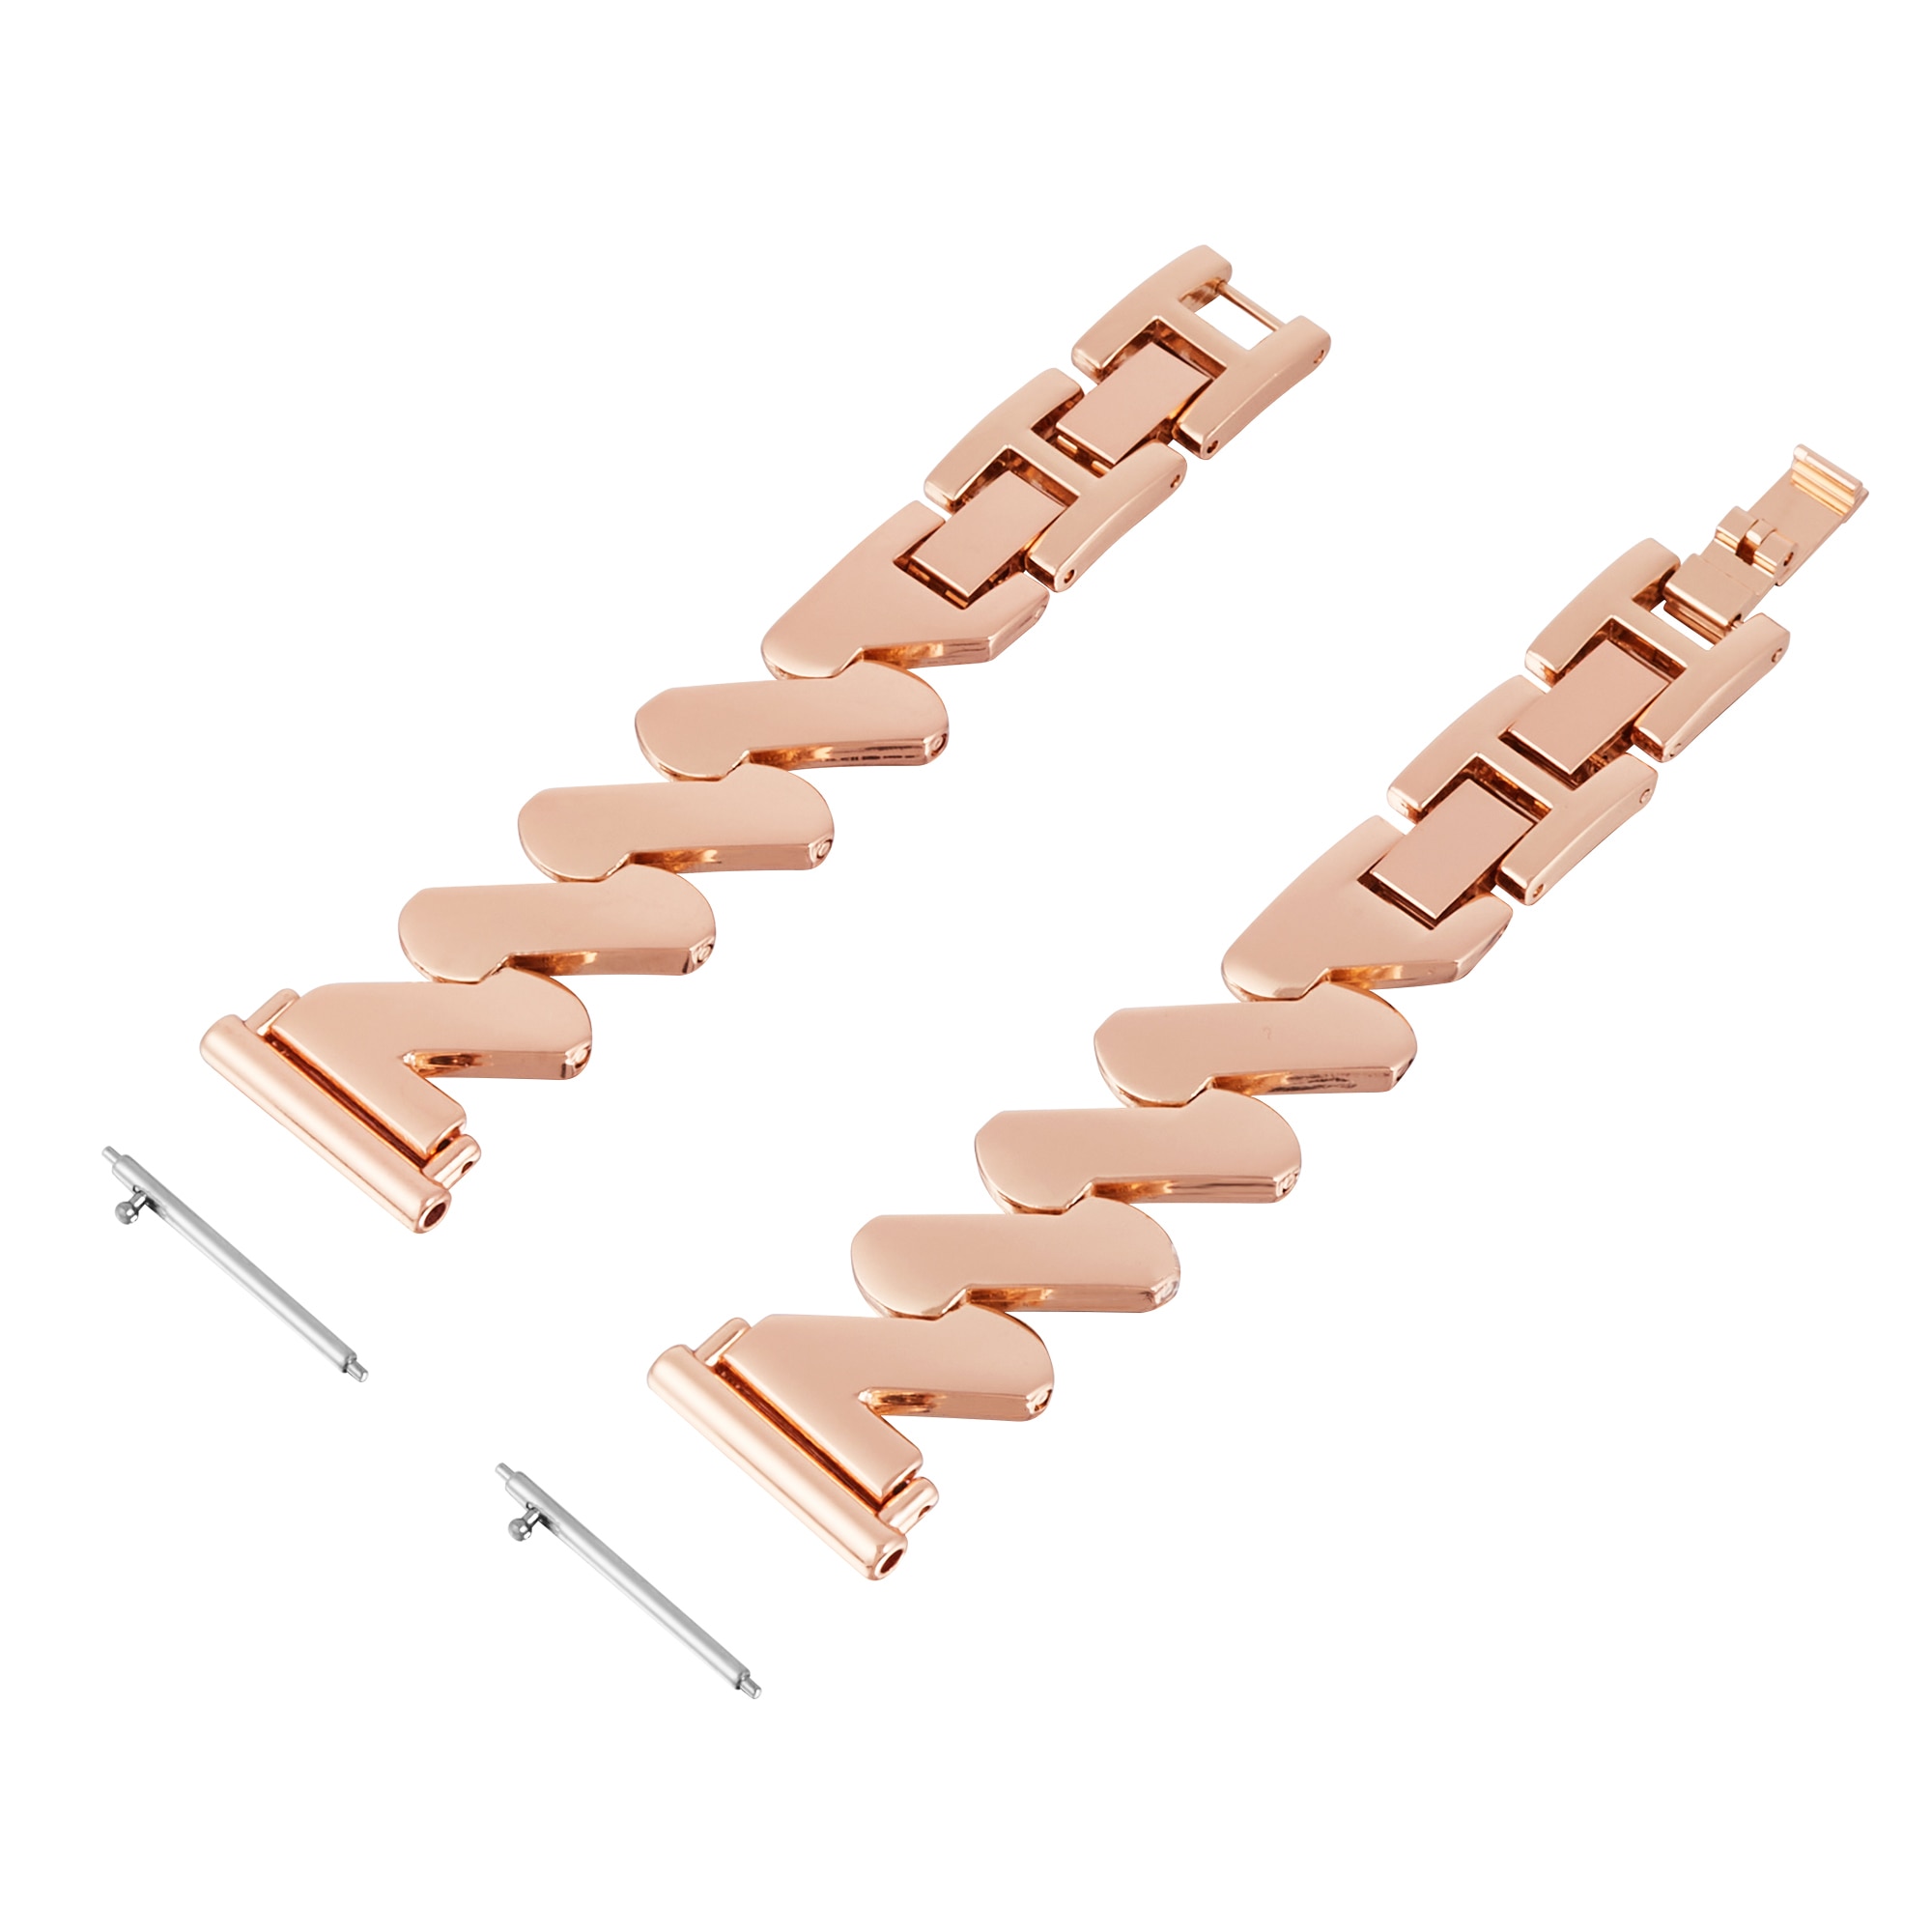 Withings ScanWatch Light Welliges Metallarmband roségold